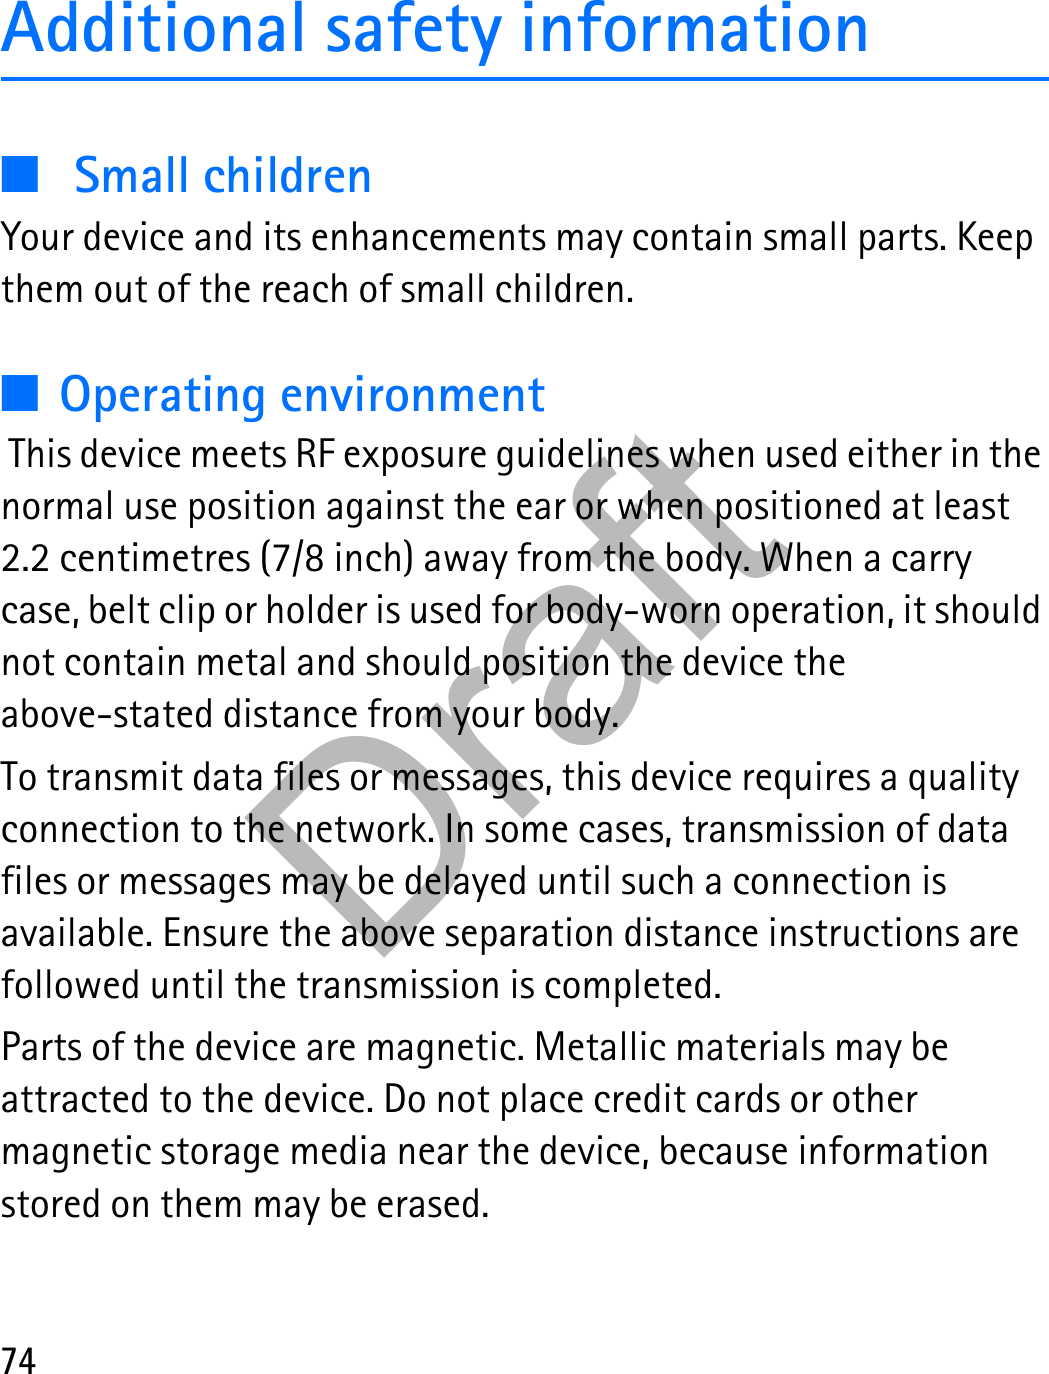 74Additional safety information■Small childrenYour device and its enhancements may contain small parts. Keep them out of the reach of small children.■Operating environment This device meets RF exposure guidelines when used either in the normal use position against the ear or when positioned at least 2.2 centimetres (7/8 inch) away from the body. When a carry case, belt clip or holder is used for body-worn operation, it should not contain metal and should position the device the above-stated distance from your body. To transmit data files or messages, this device requires a quality connection to the network. In some cases, transmission of data files or messages may be delayed until such a connection is available. Ensure the above separation distance instructions are followed until the transmission is completed.Parts of the device are magnetic. Metallic materials may be attracted to the device. Do not place credit cards or other magnetic storage media near the device, because information stored on them may be erased.Draft